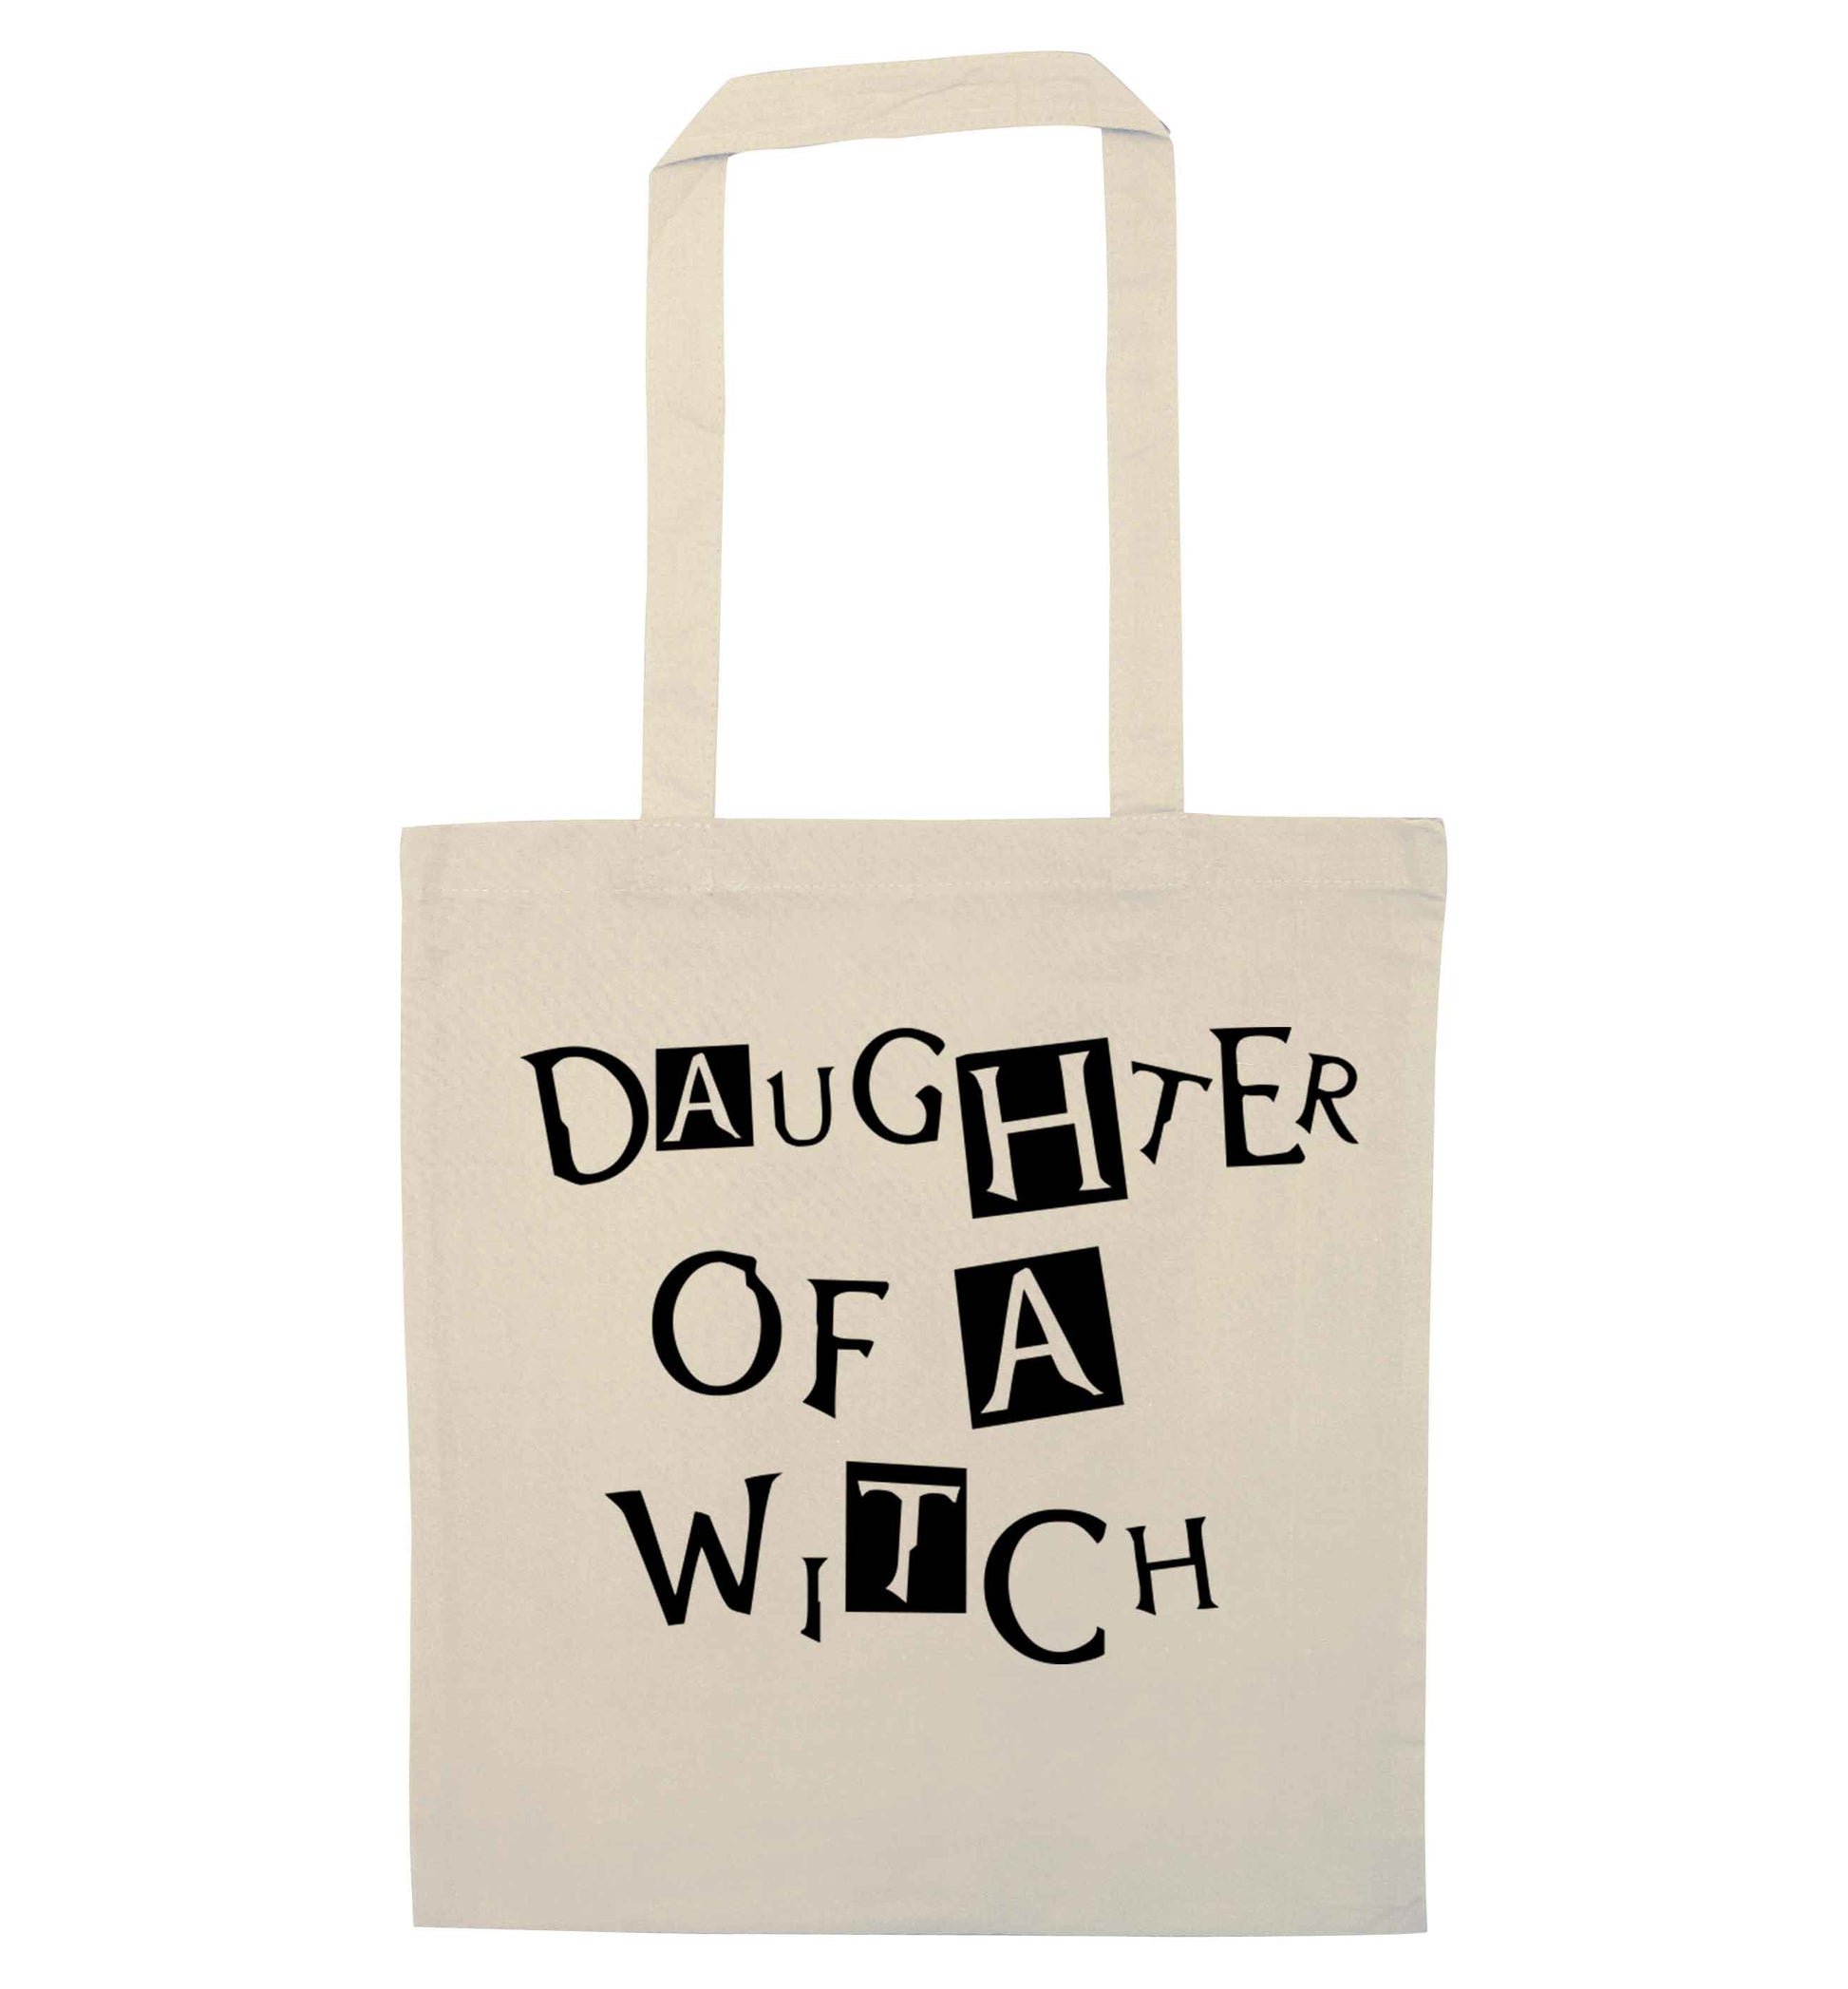 Daughter of a witch natural tote bag